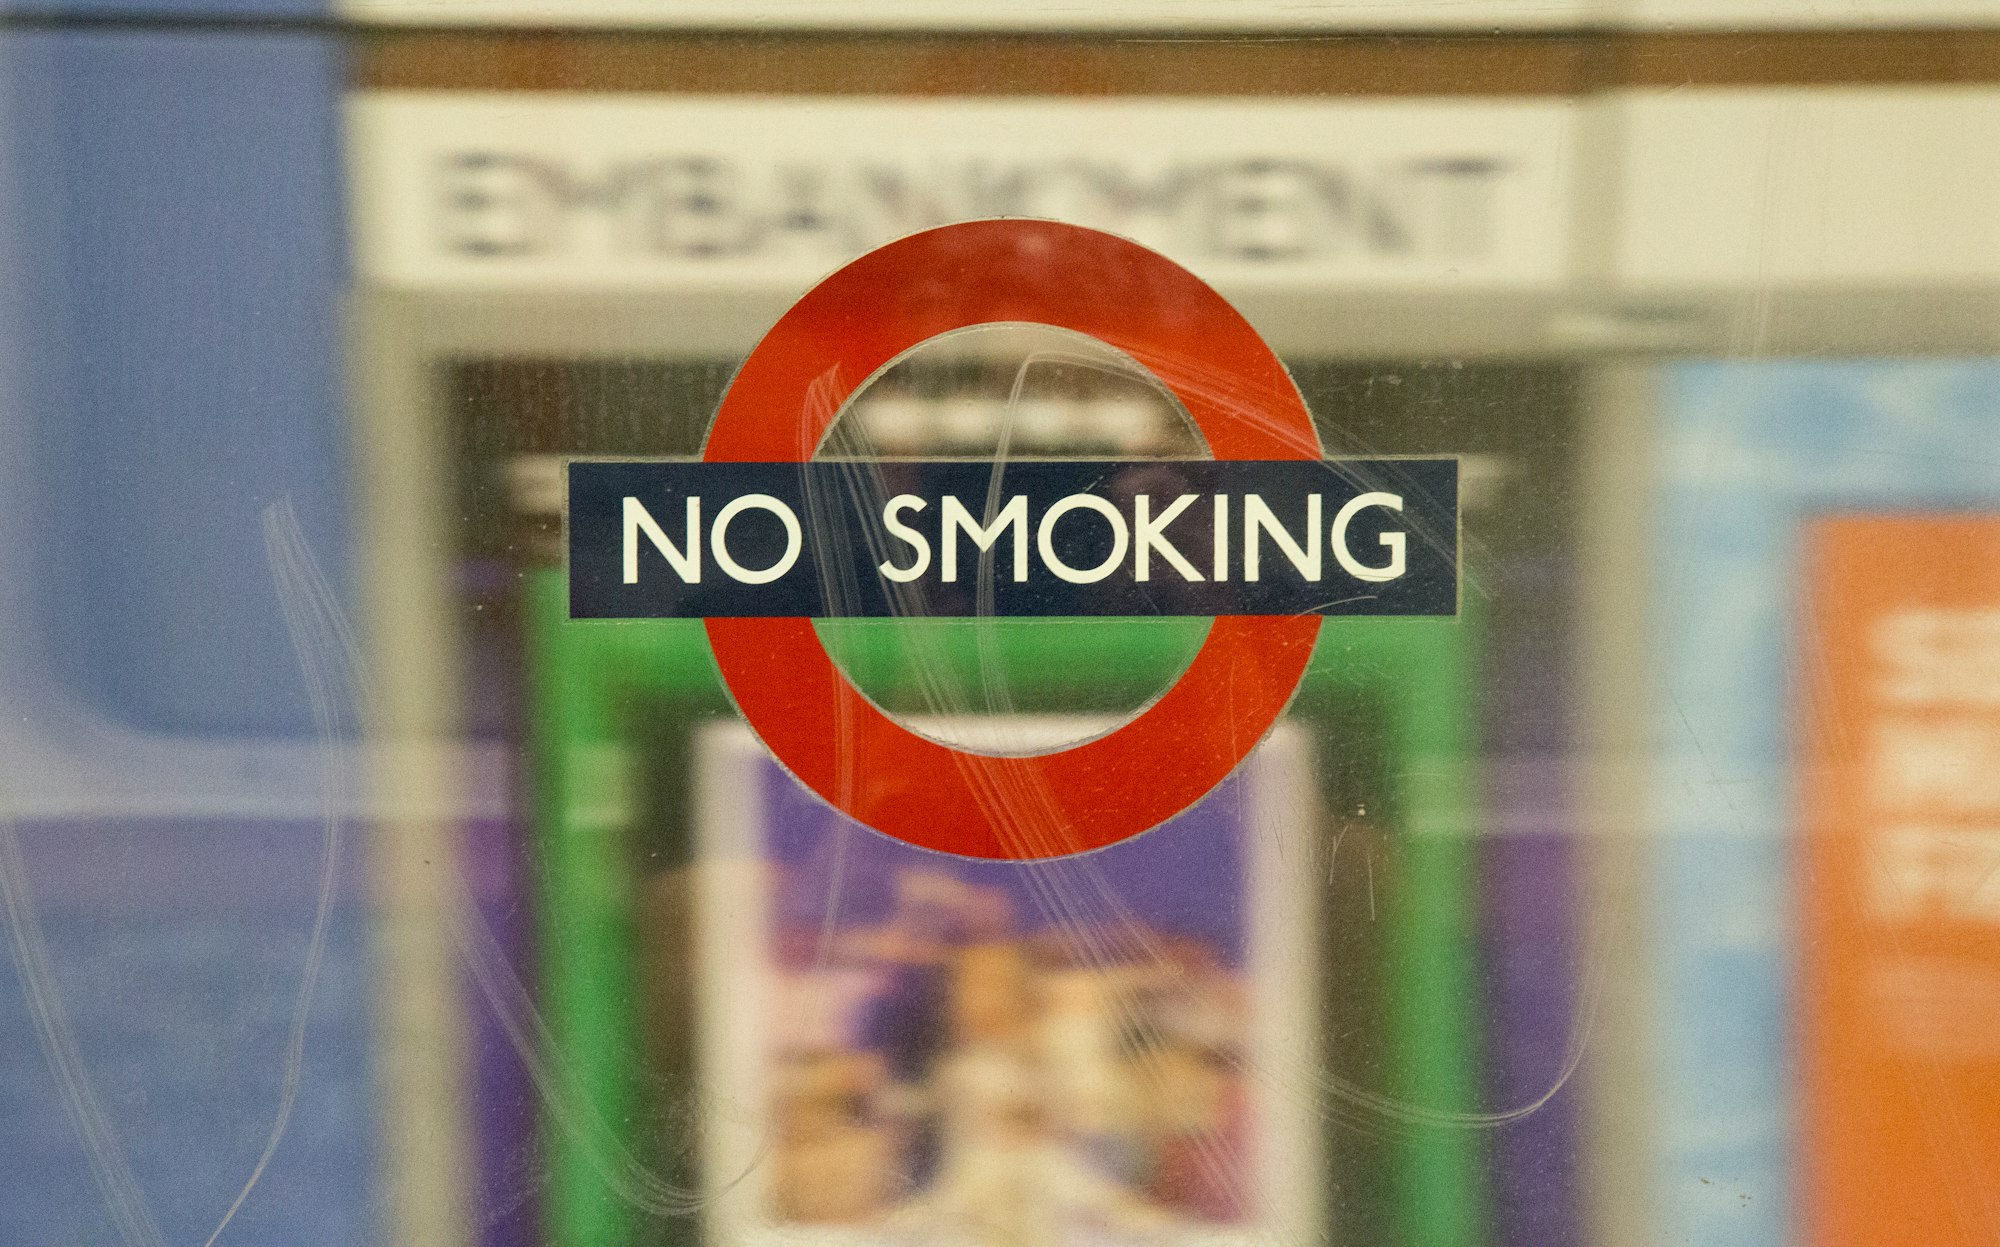 Smoking hasn’t been allowed in the London Underground for almost 30 years. Yet, they still keep reminding us…